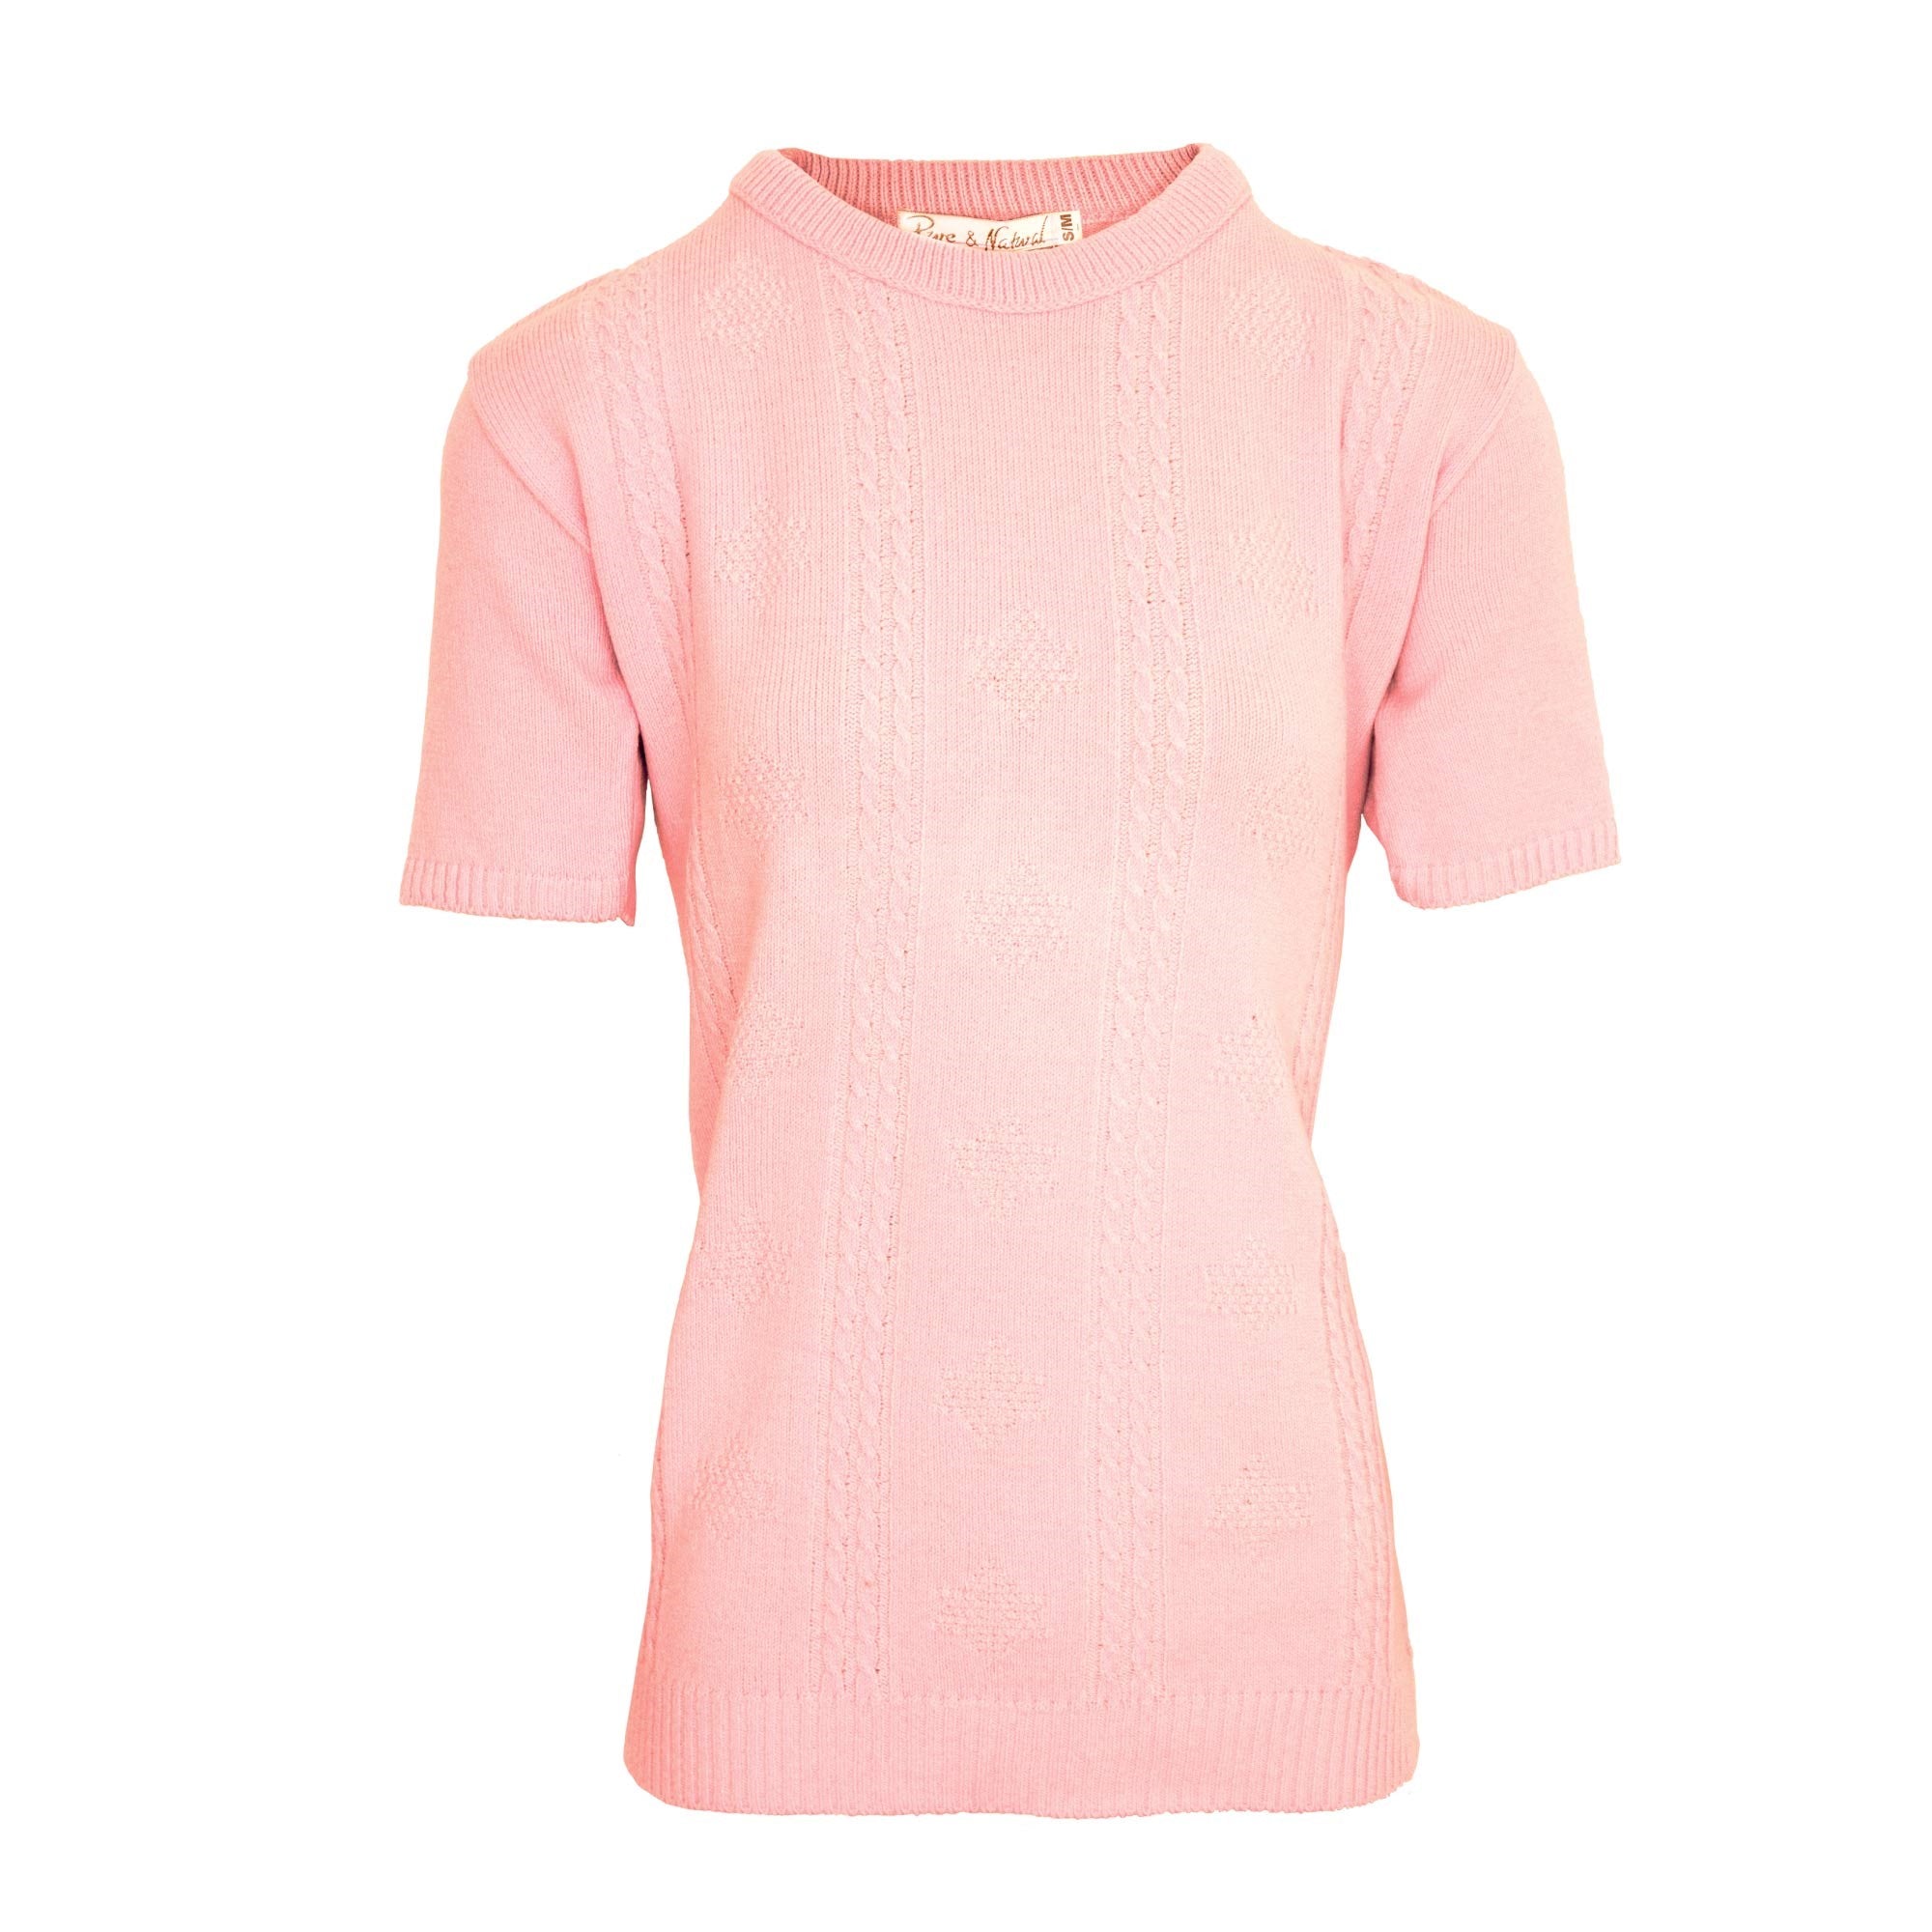 Ladies Cable Front Sweater - Pink - Pink / M/L - TJ Hughes